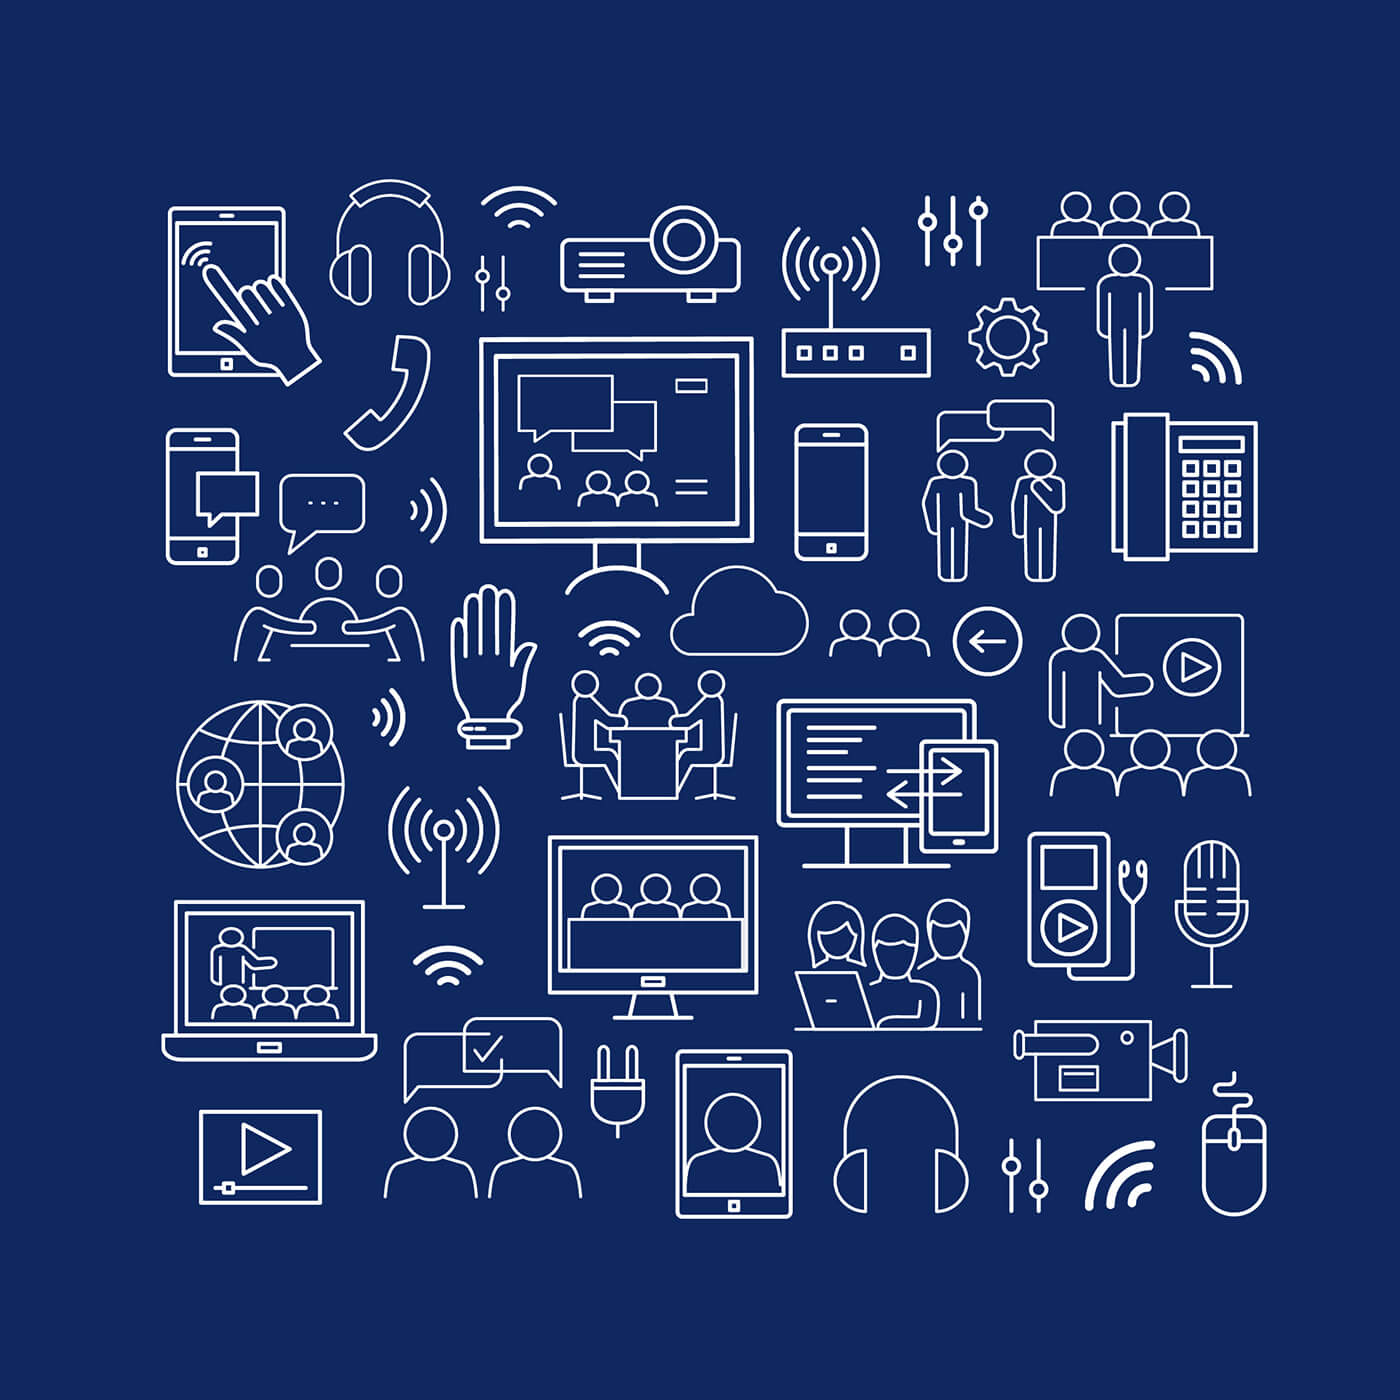 White outline icons of virtual meetings on a dark blue background